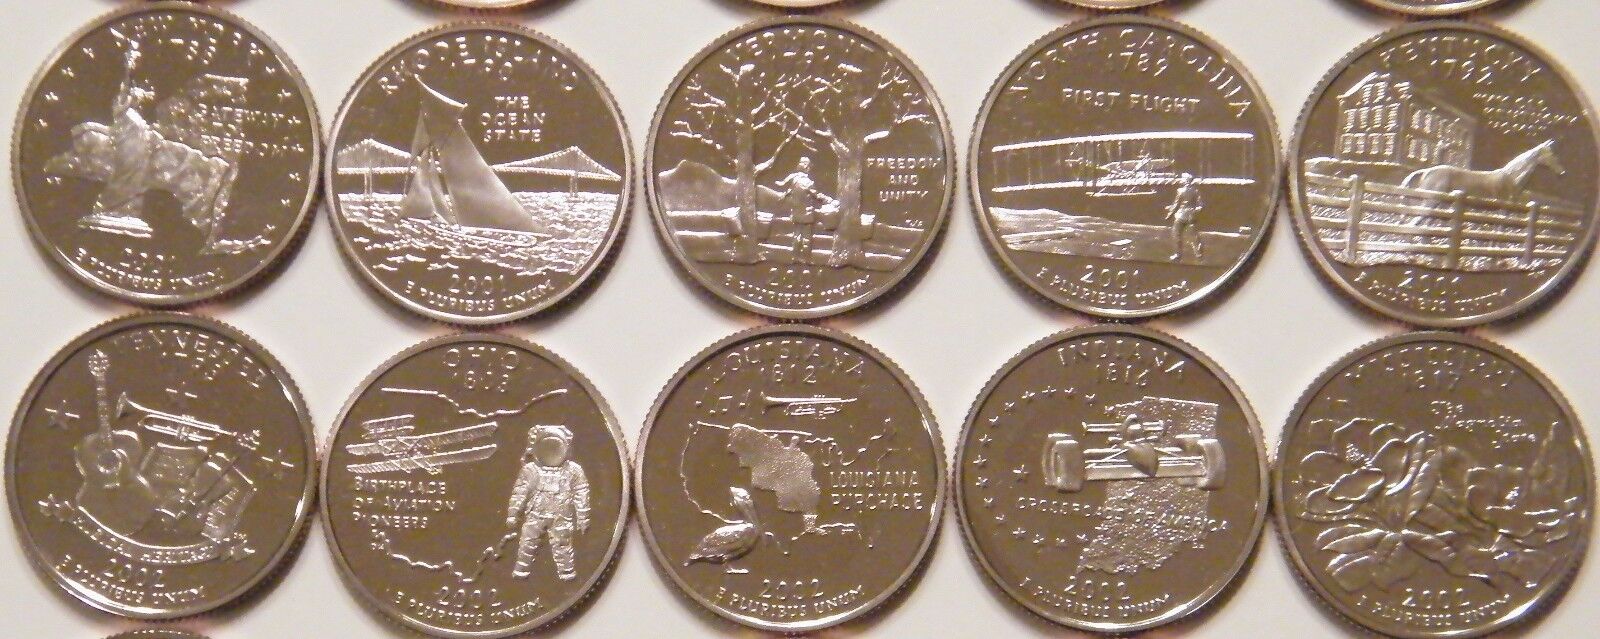 1999-2009 S -State Quarters Clad Proof - Complete 50 Coins  & DC Territories set